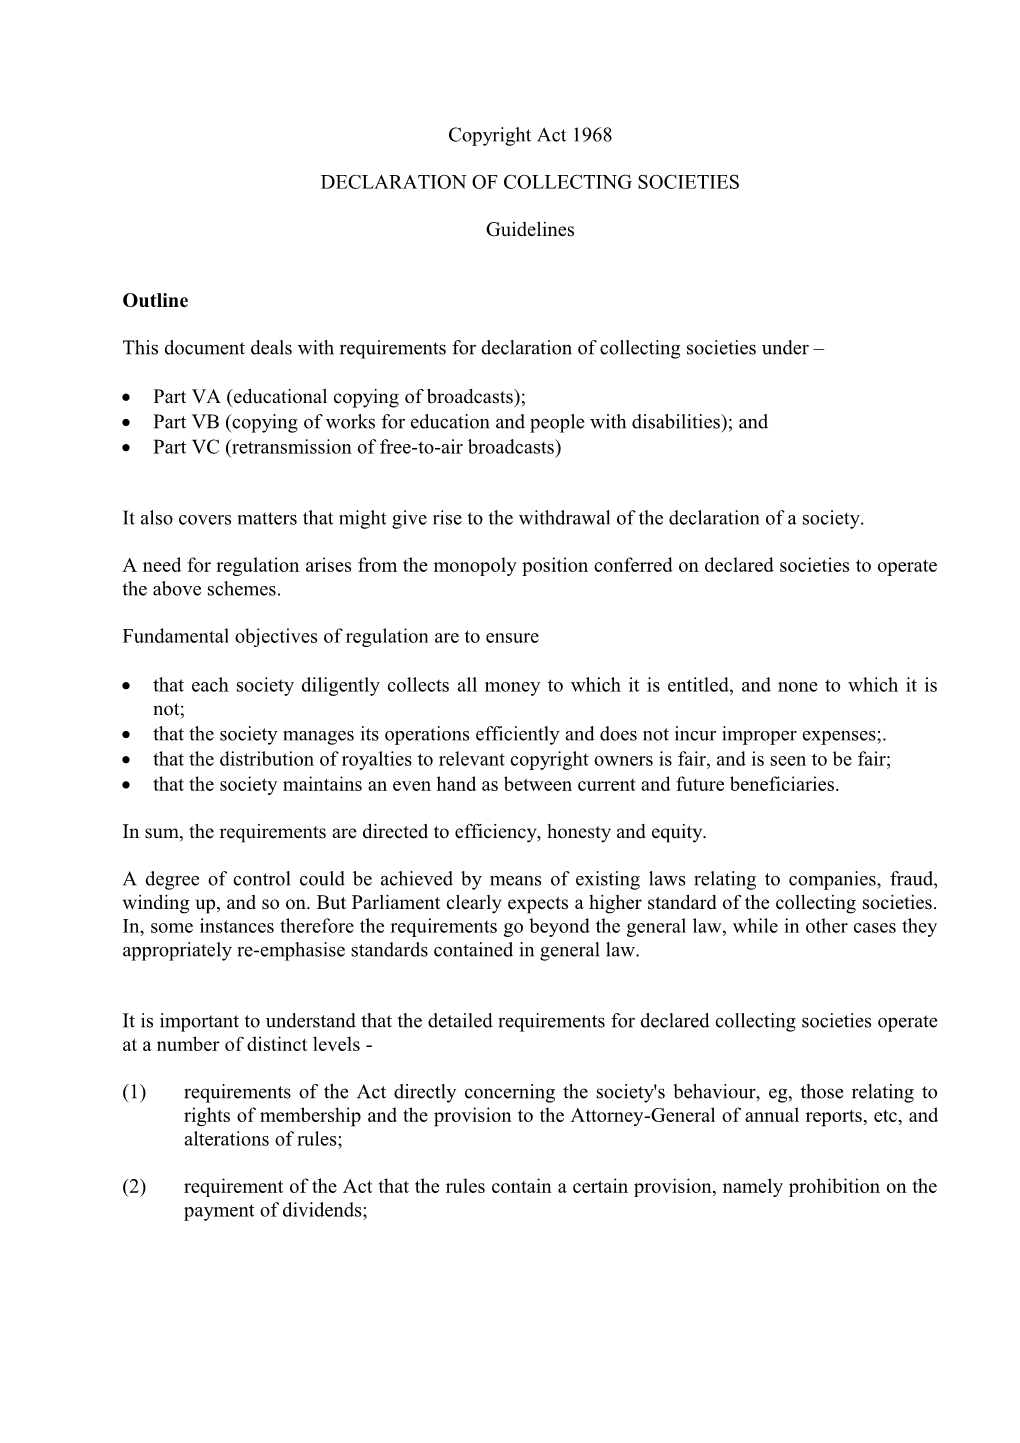 This Document Deals with Requirements for Declaration of Collecting Societies Under